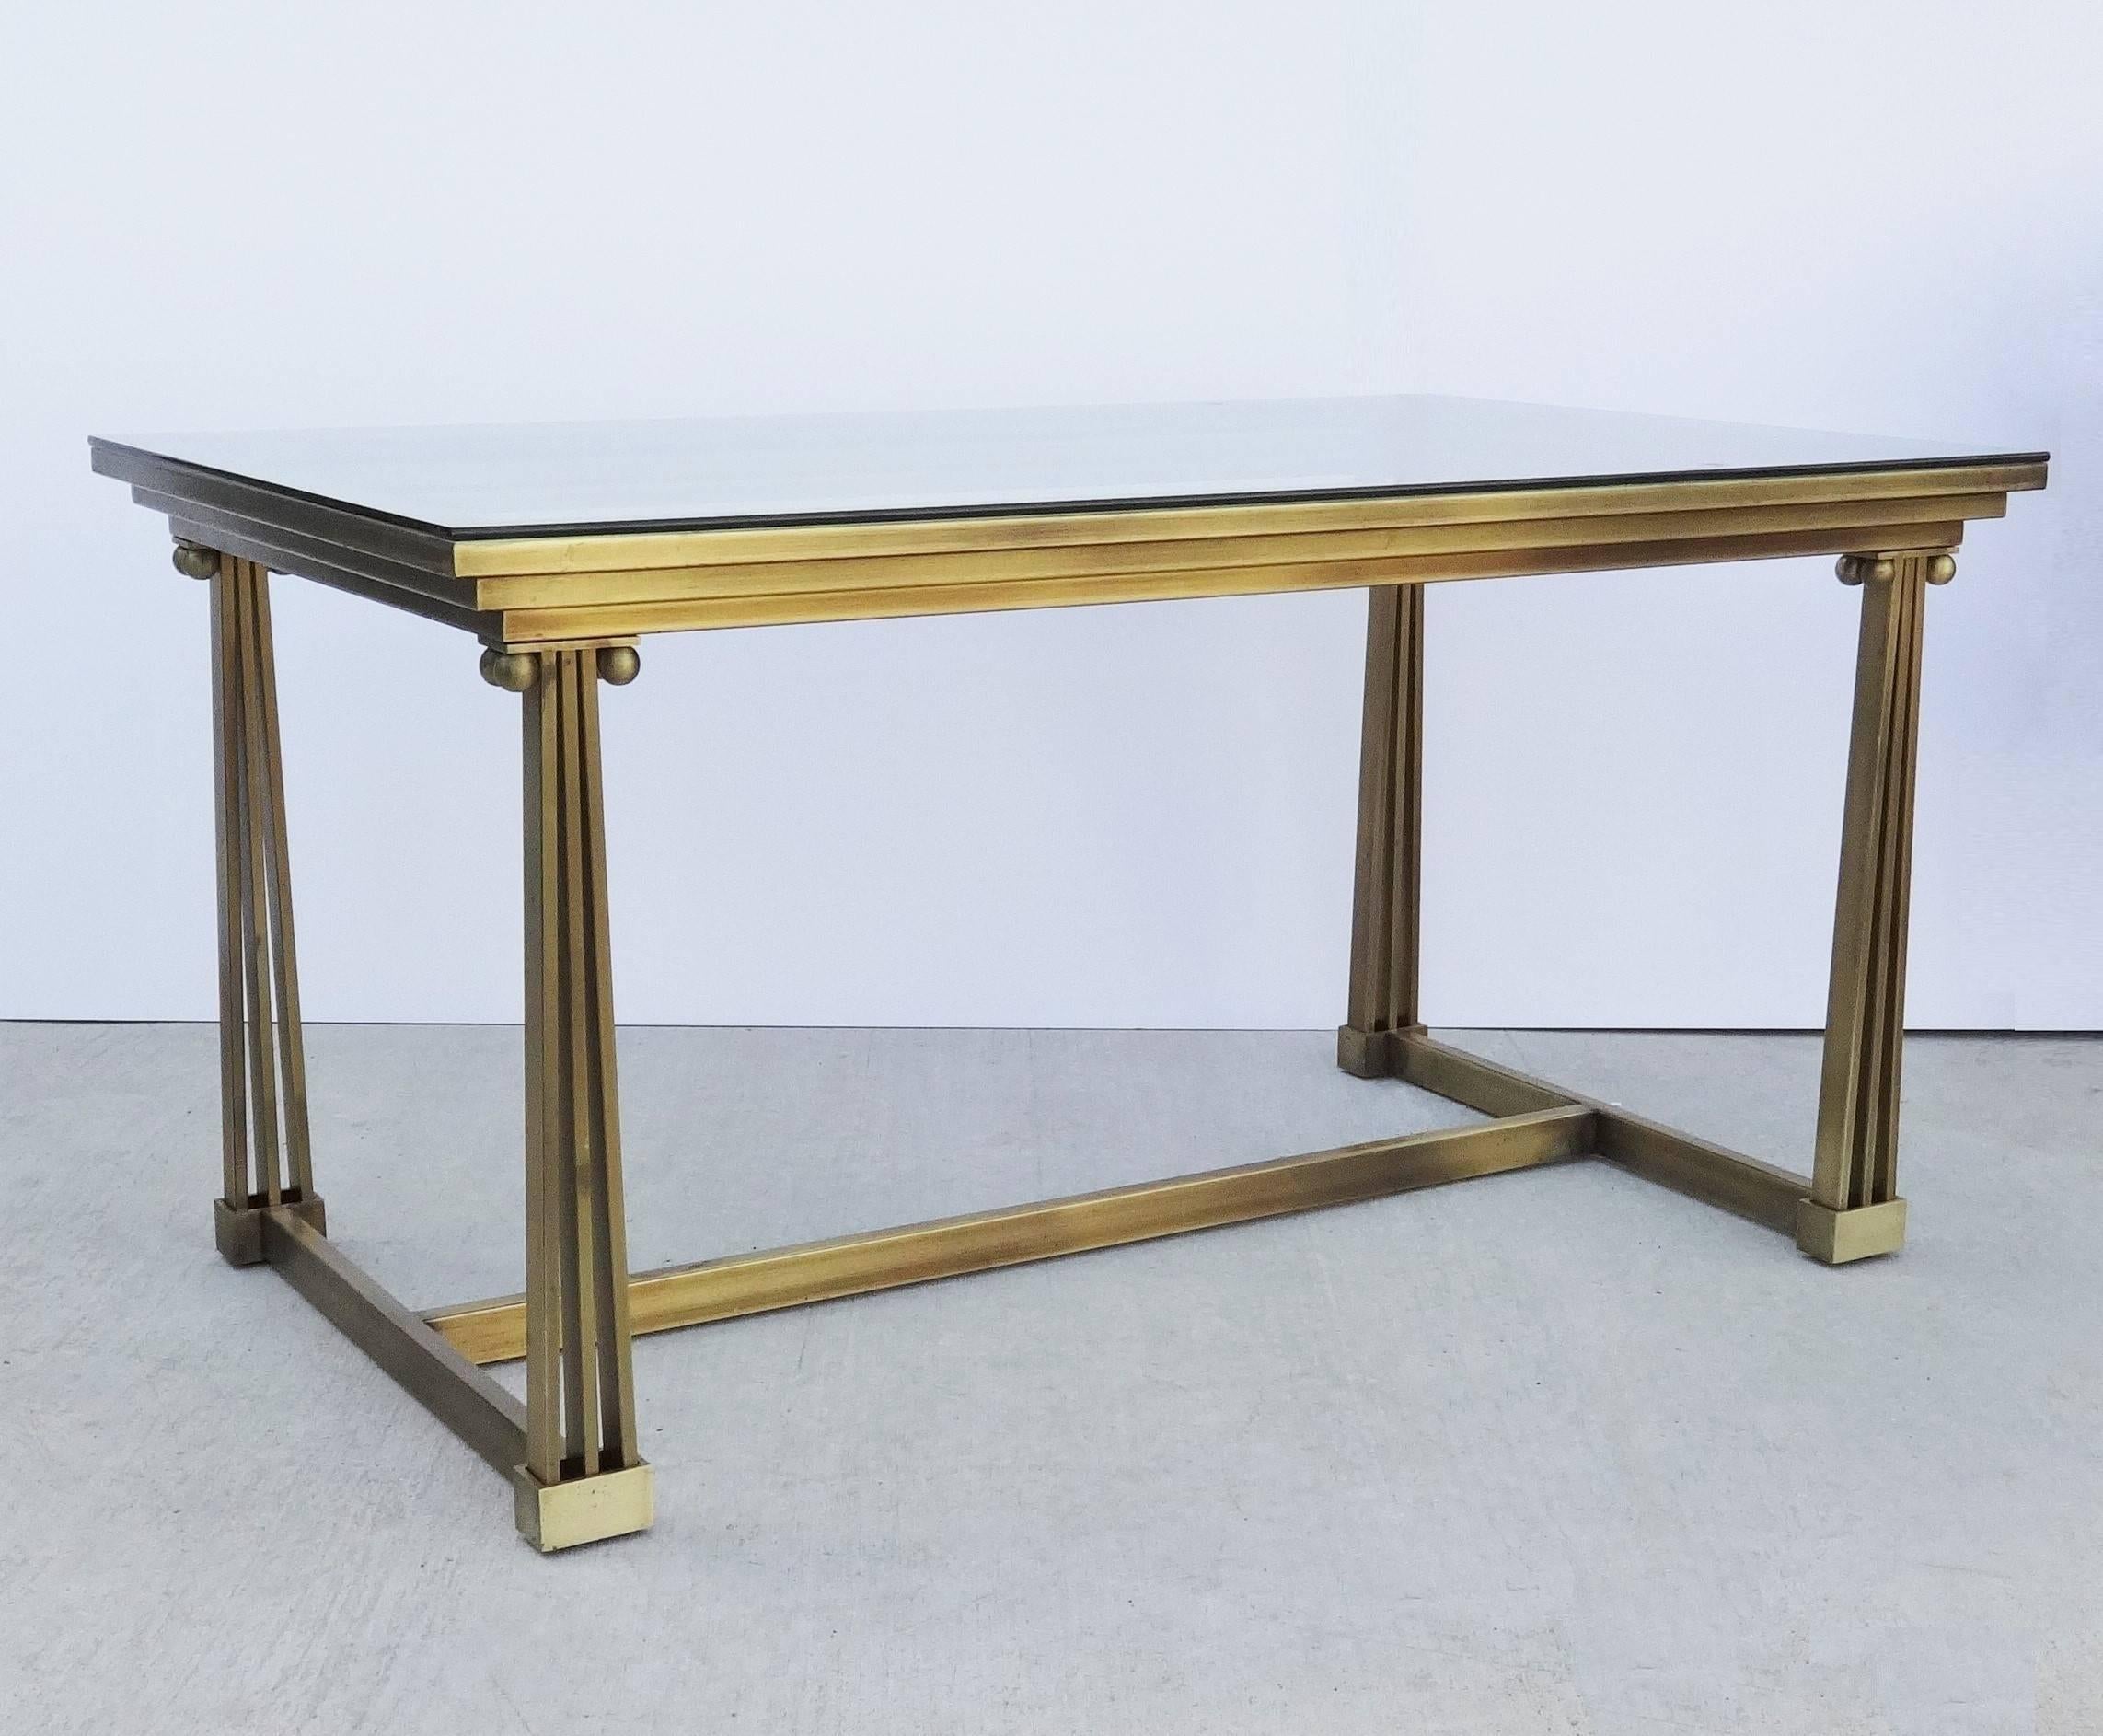 Attributed to Mastercraft (American, 1946-1985), probably 1970s. A polished brass and glass desk, writing table or dining table having a rectangular projecting and stepped top inset with conforming glass supported by  four legs modeled as Ionic